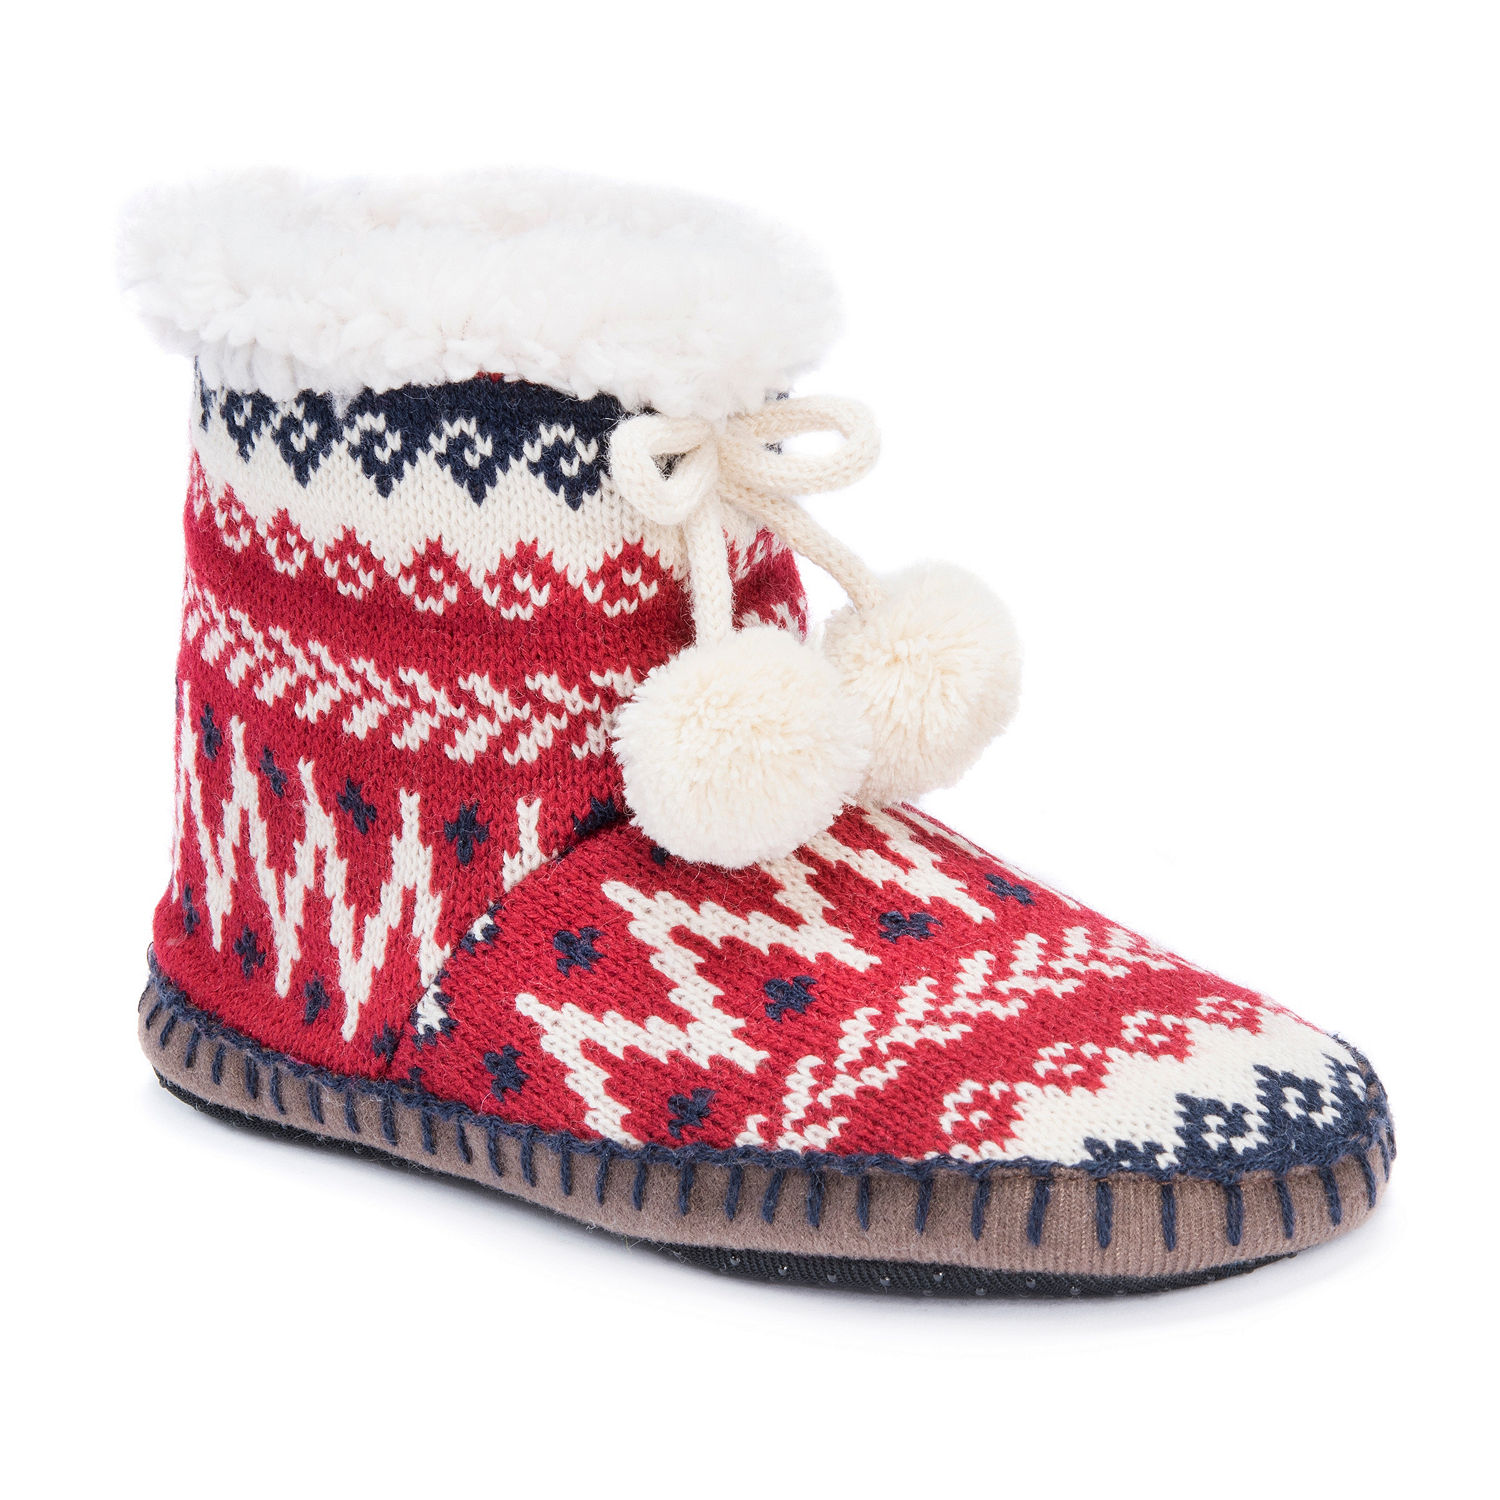 Muk Luks Womens Bootie Slippers, Color: Candy Apple - JCPenney